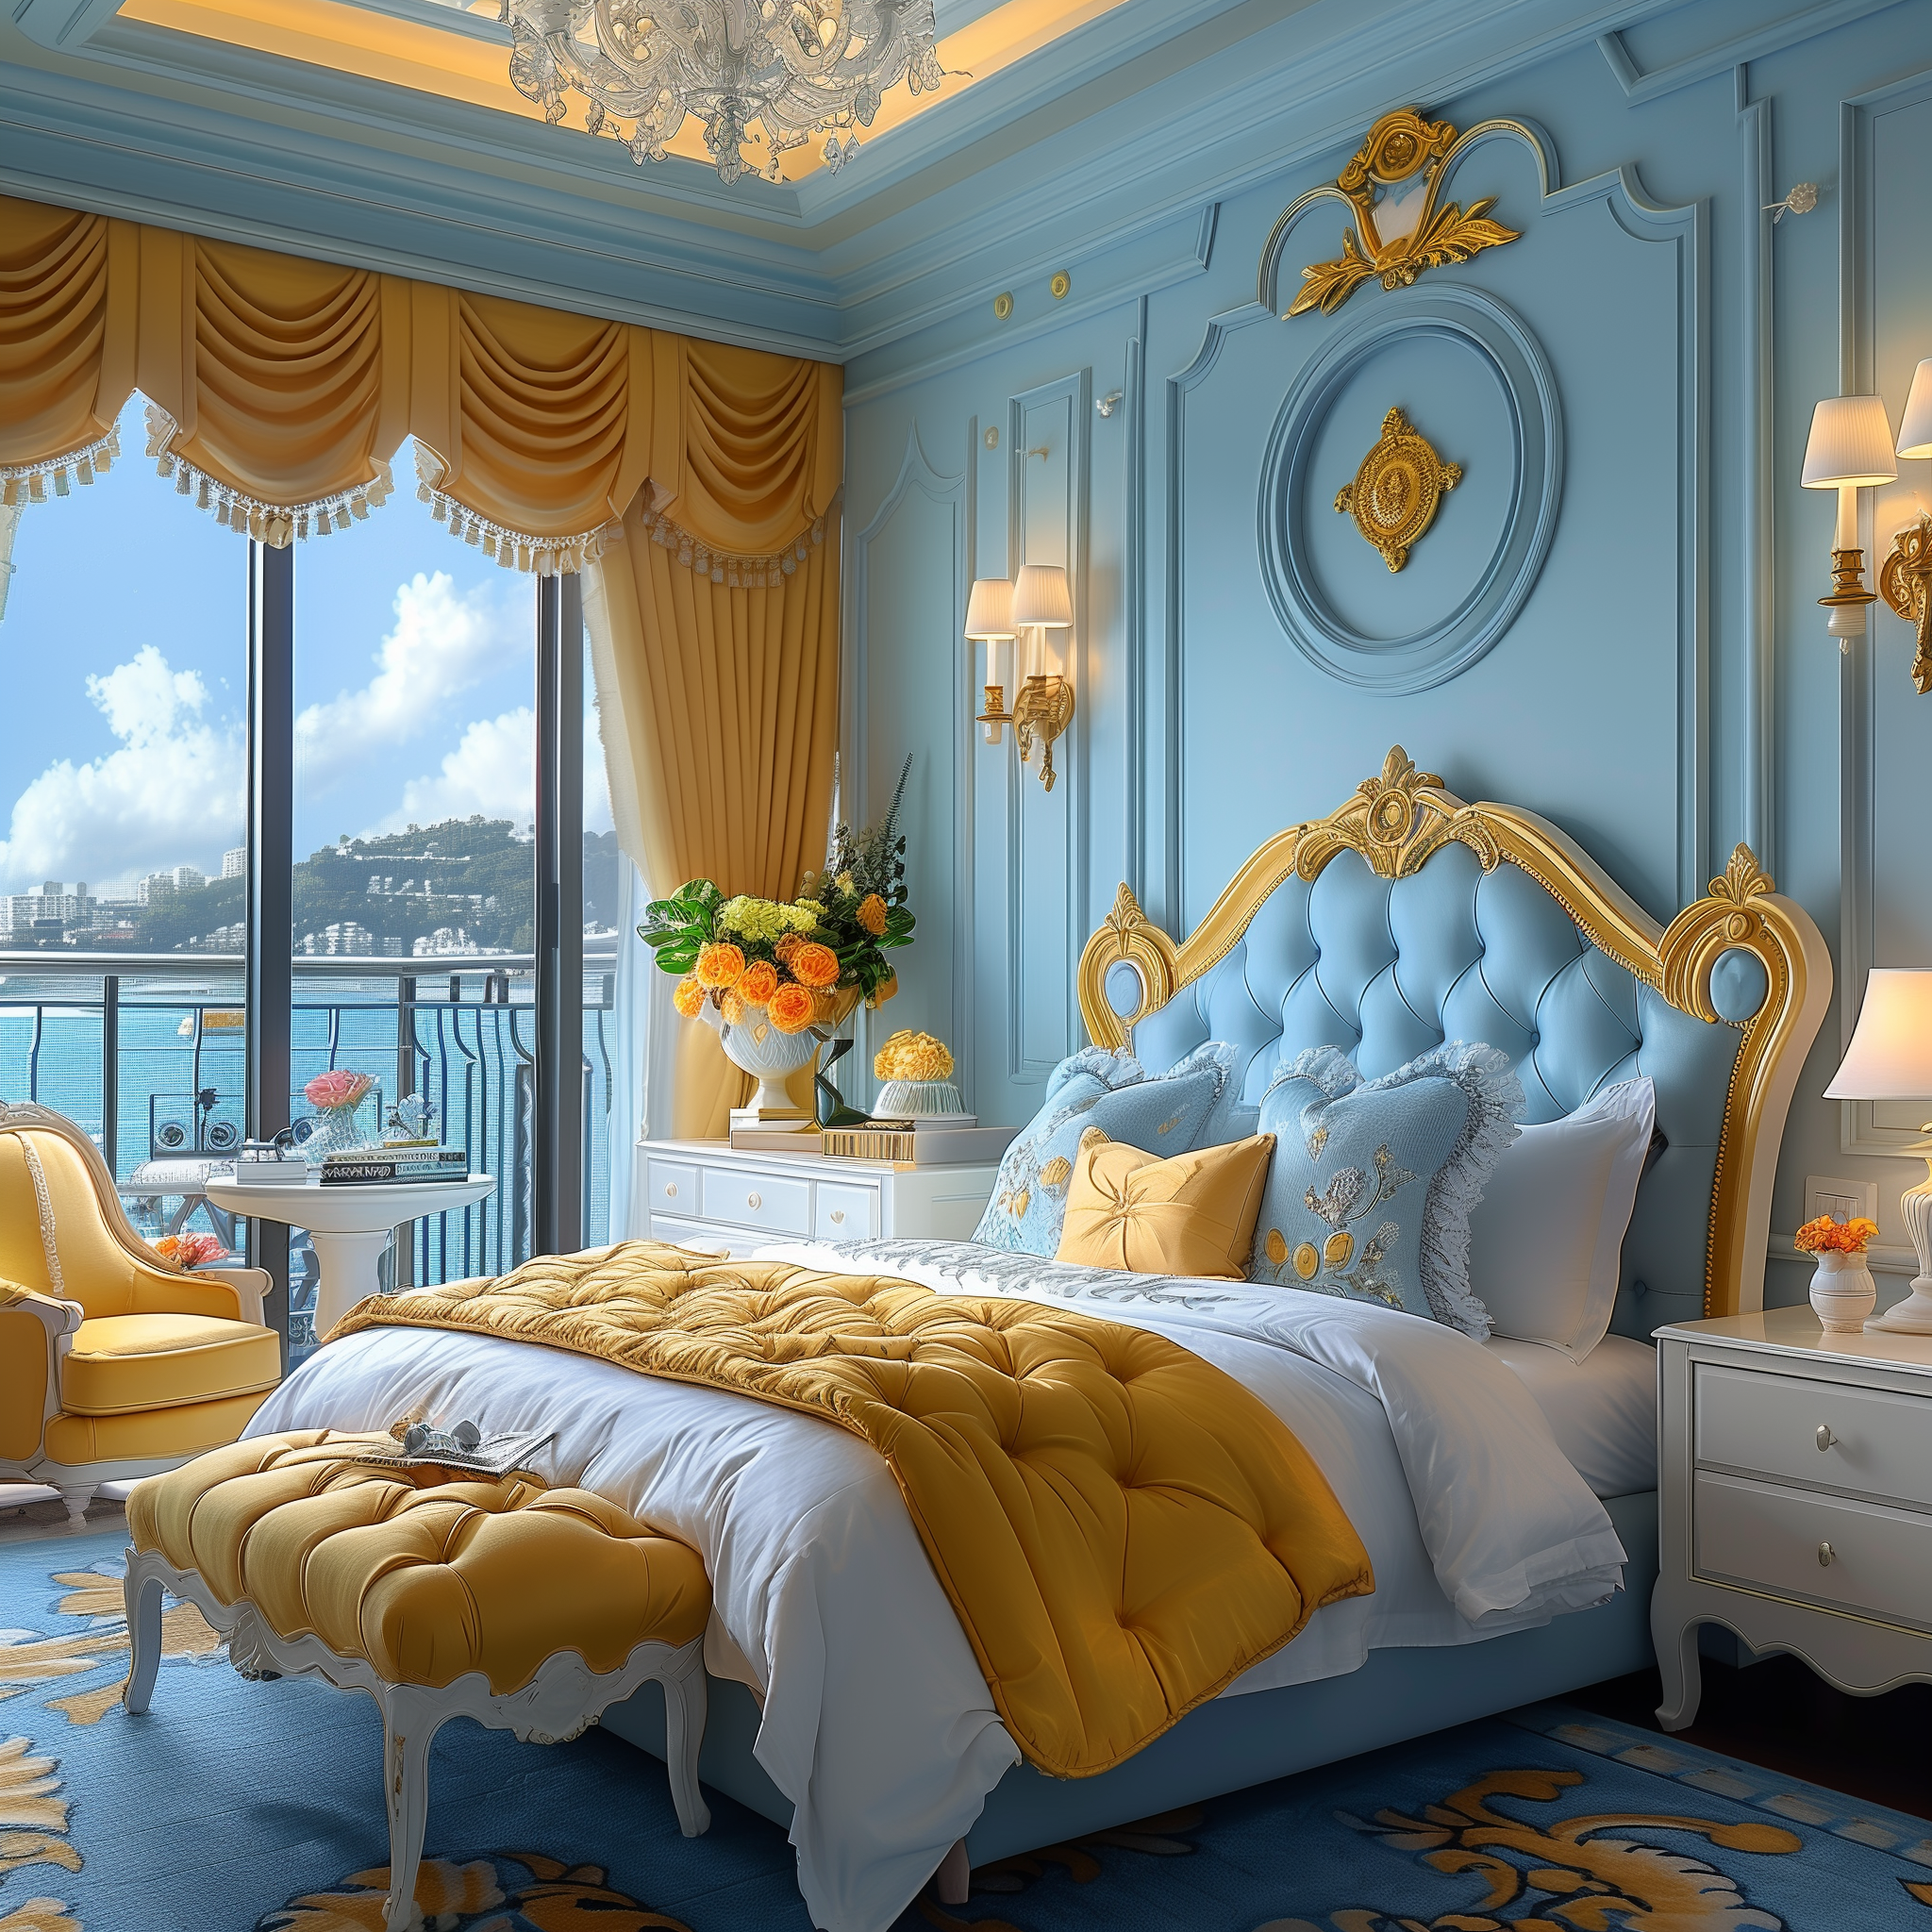 Luxurious Disney-themed bedroom with blue walls and elegant gold accents for avatar or profile picture use.